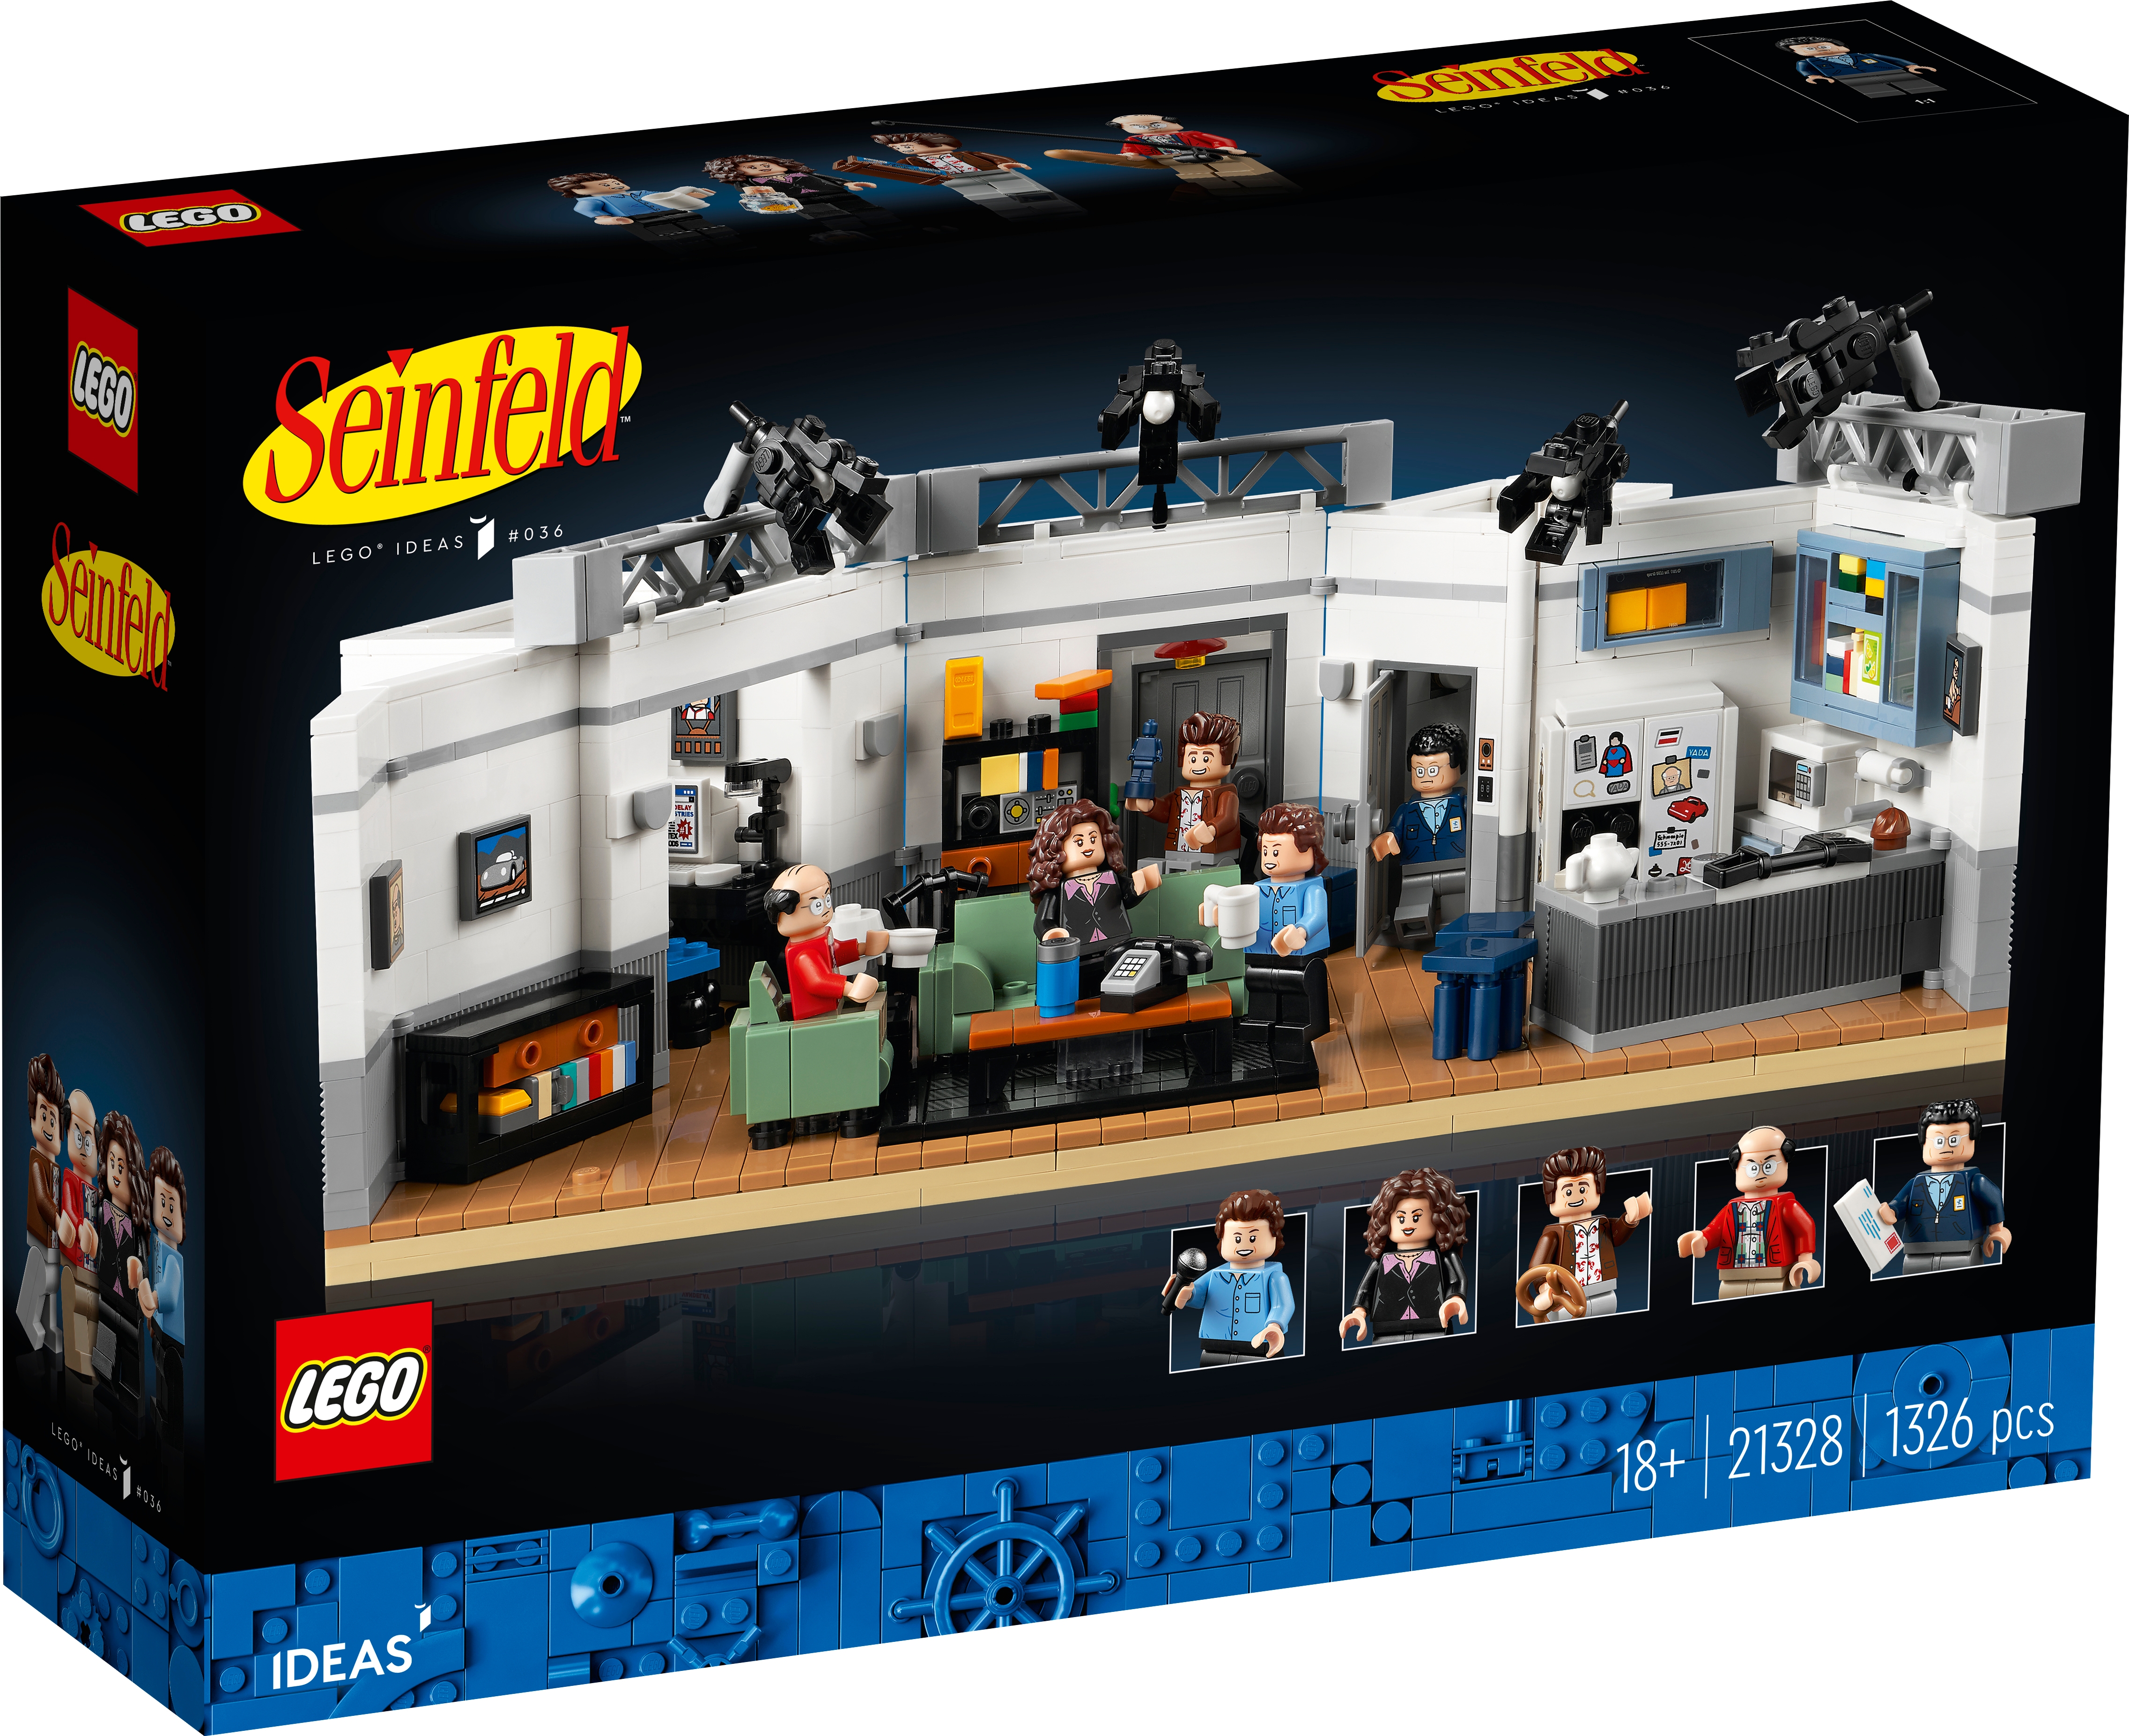 Image of the LEGO set product packaging